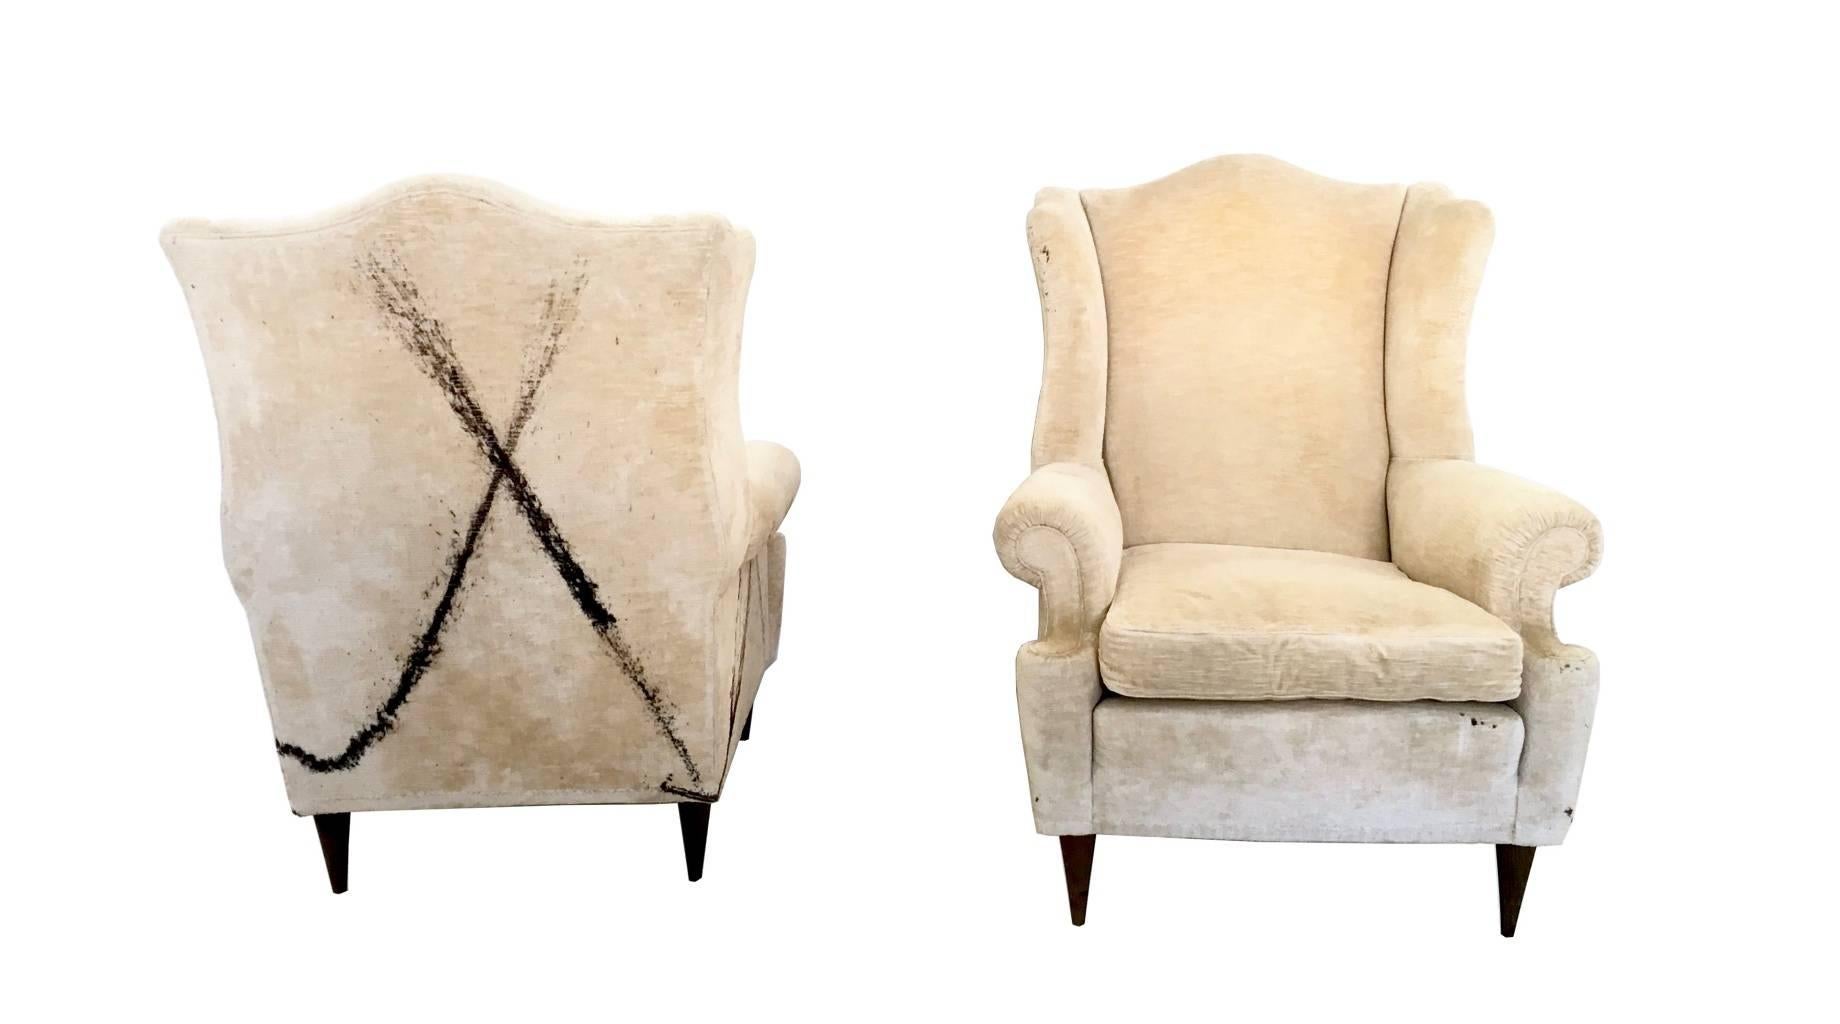 Made in Italy, 1950s.
These armchairs are upholstered in beige velvet and feature a black painted cross.
They are vintage, therefore they might show slight traces of use, but they can be considered as in very good original condition.

Measures: